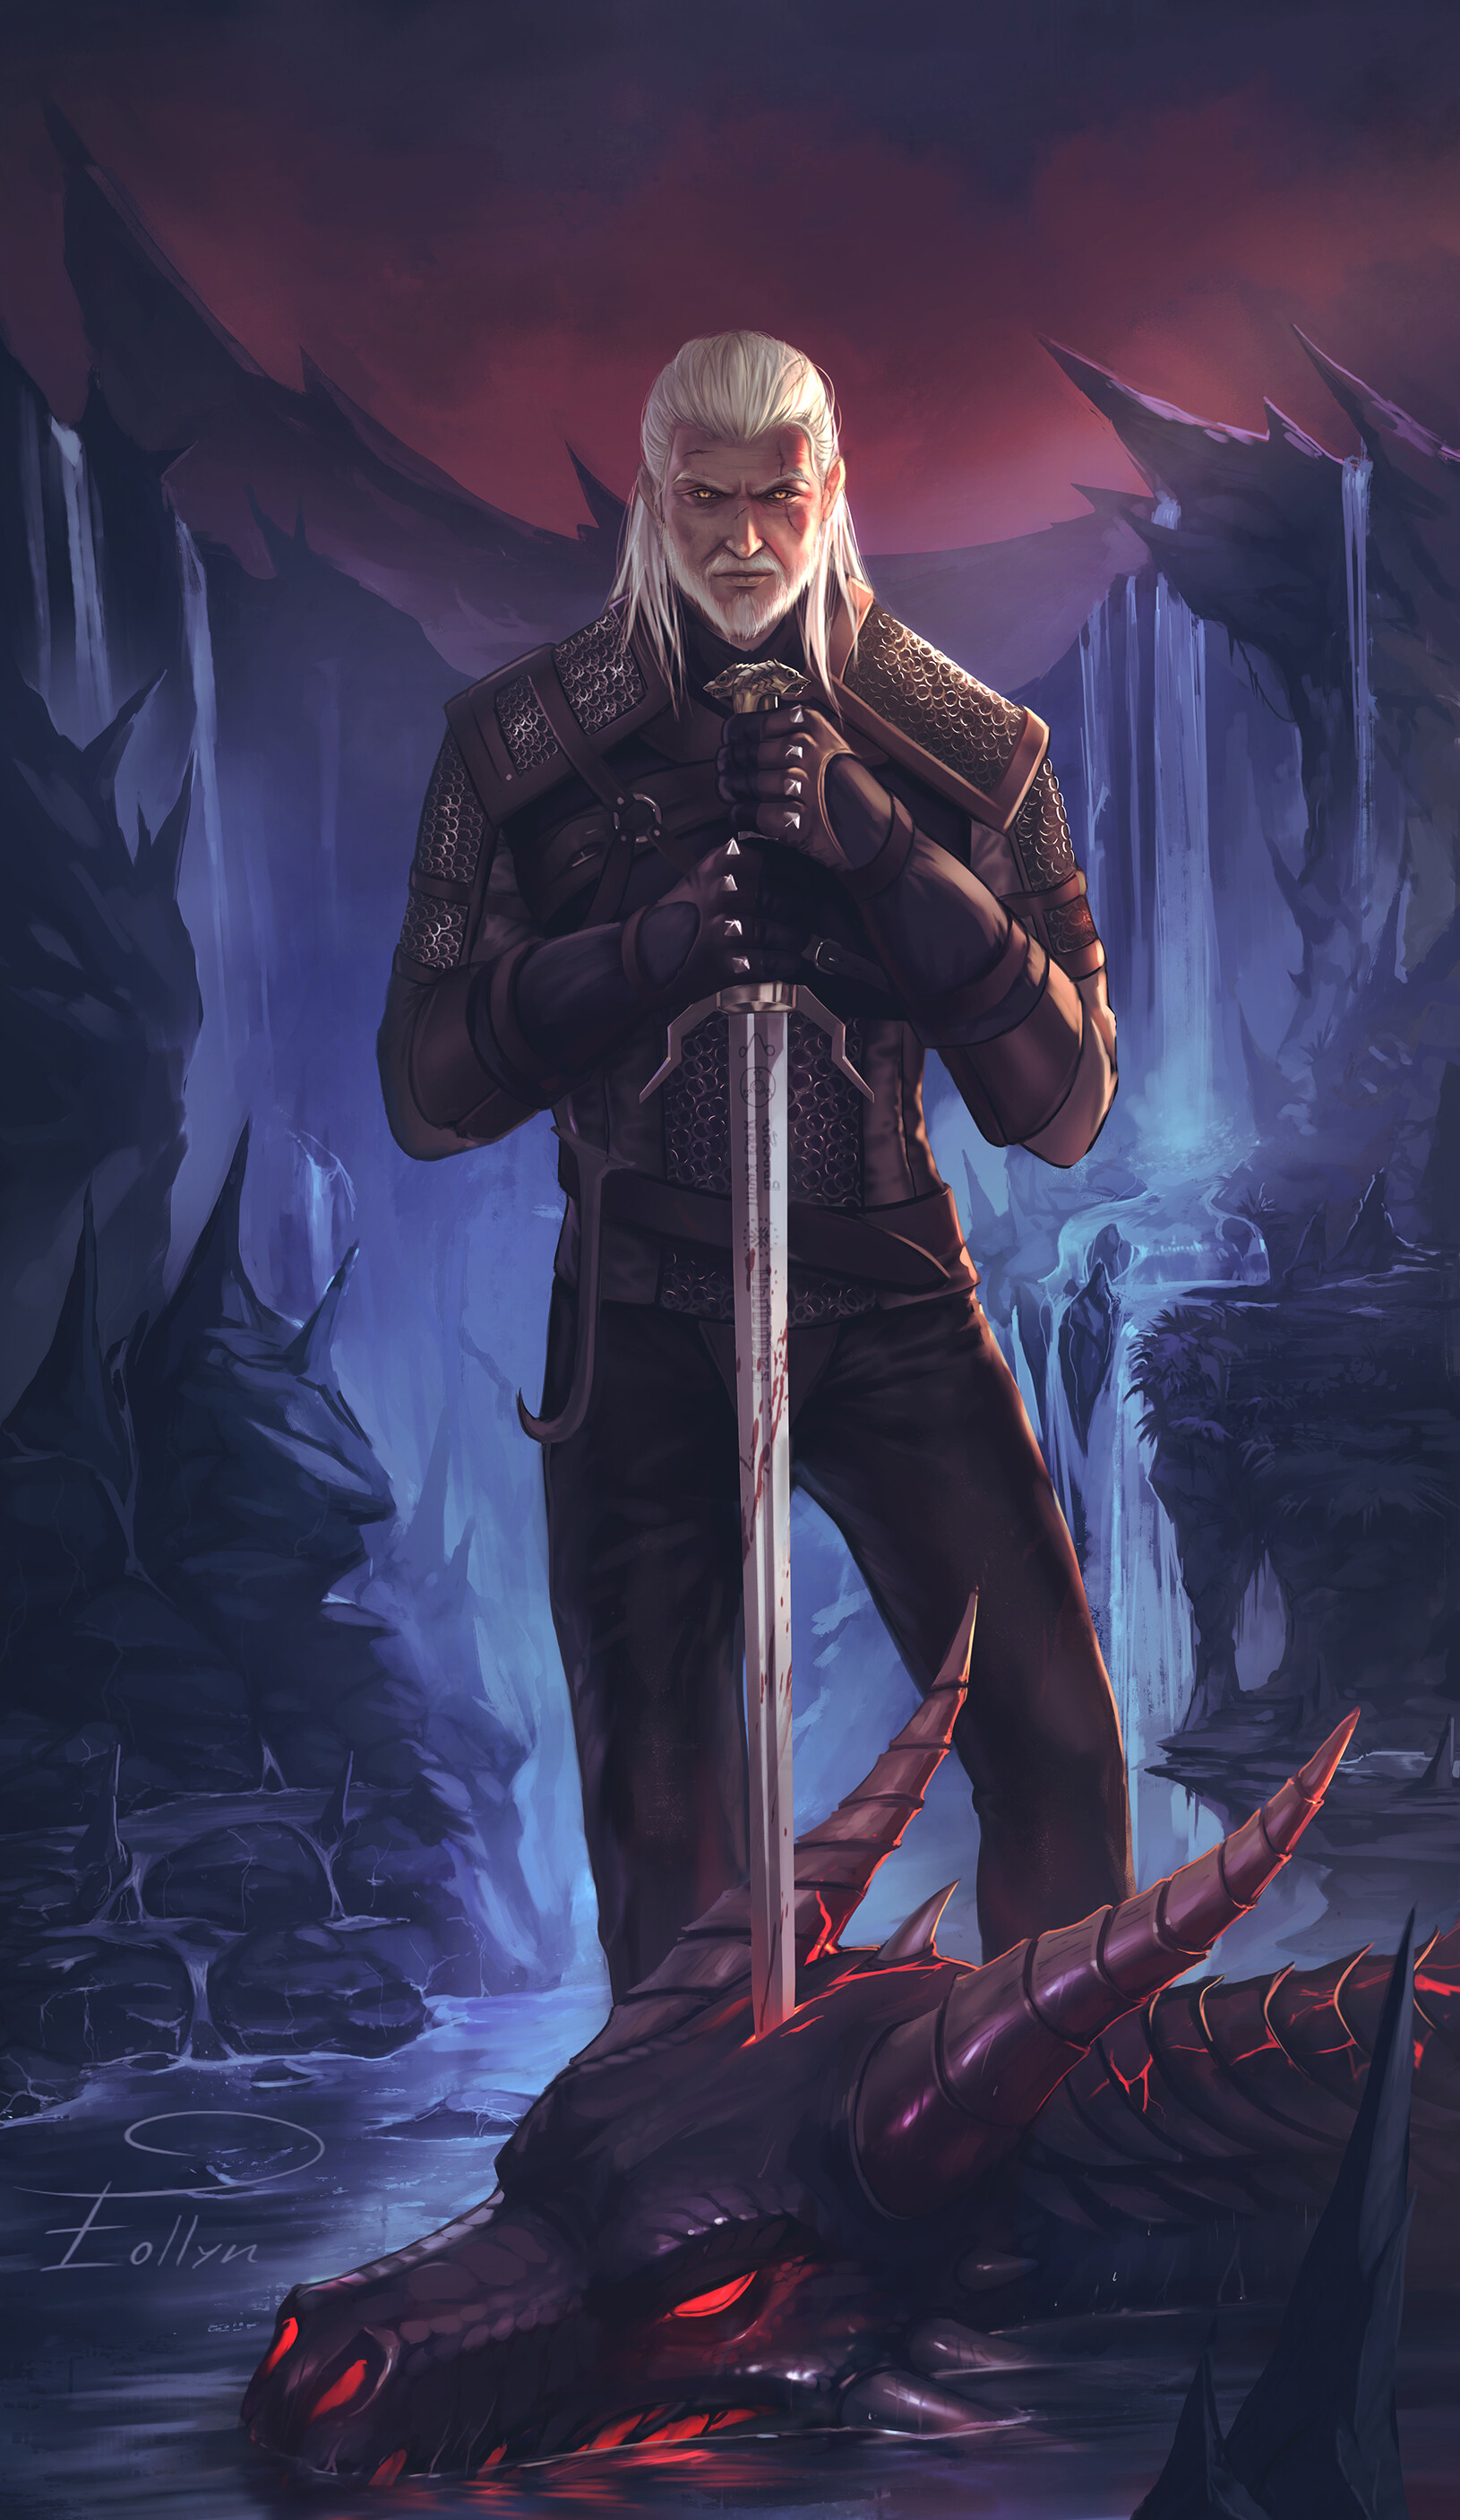 The Witcher 3 Wild Hunt Art By Eollyn Art